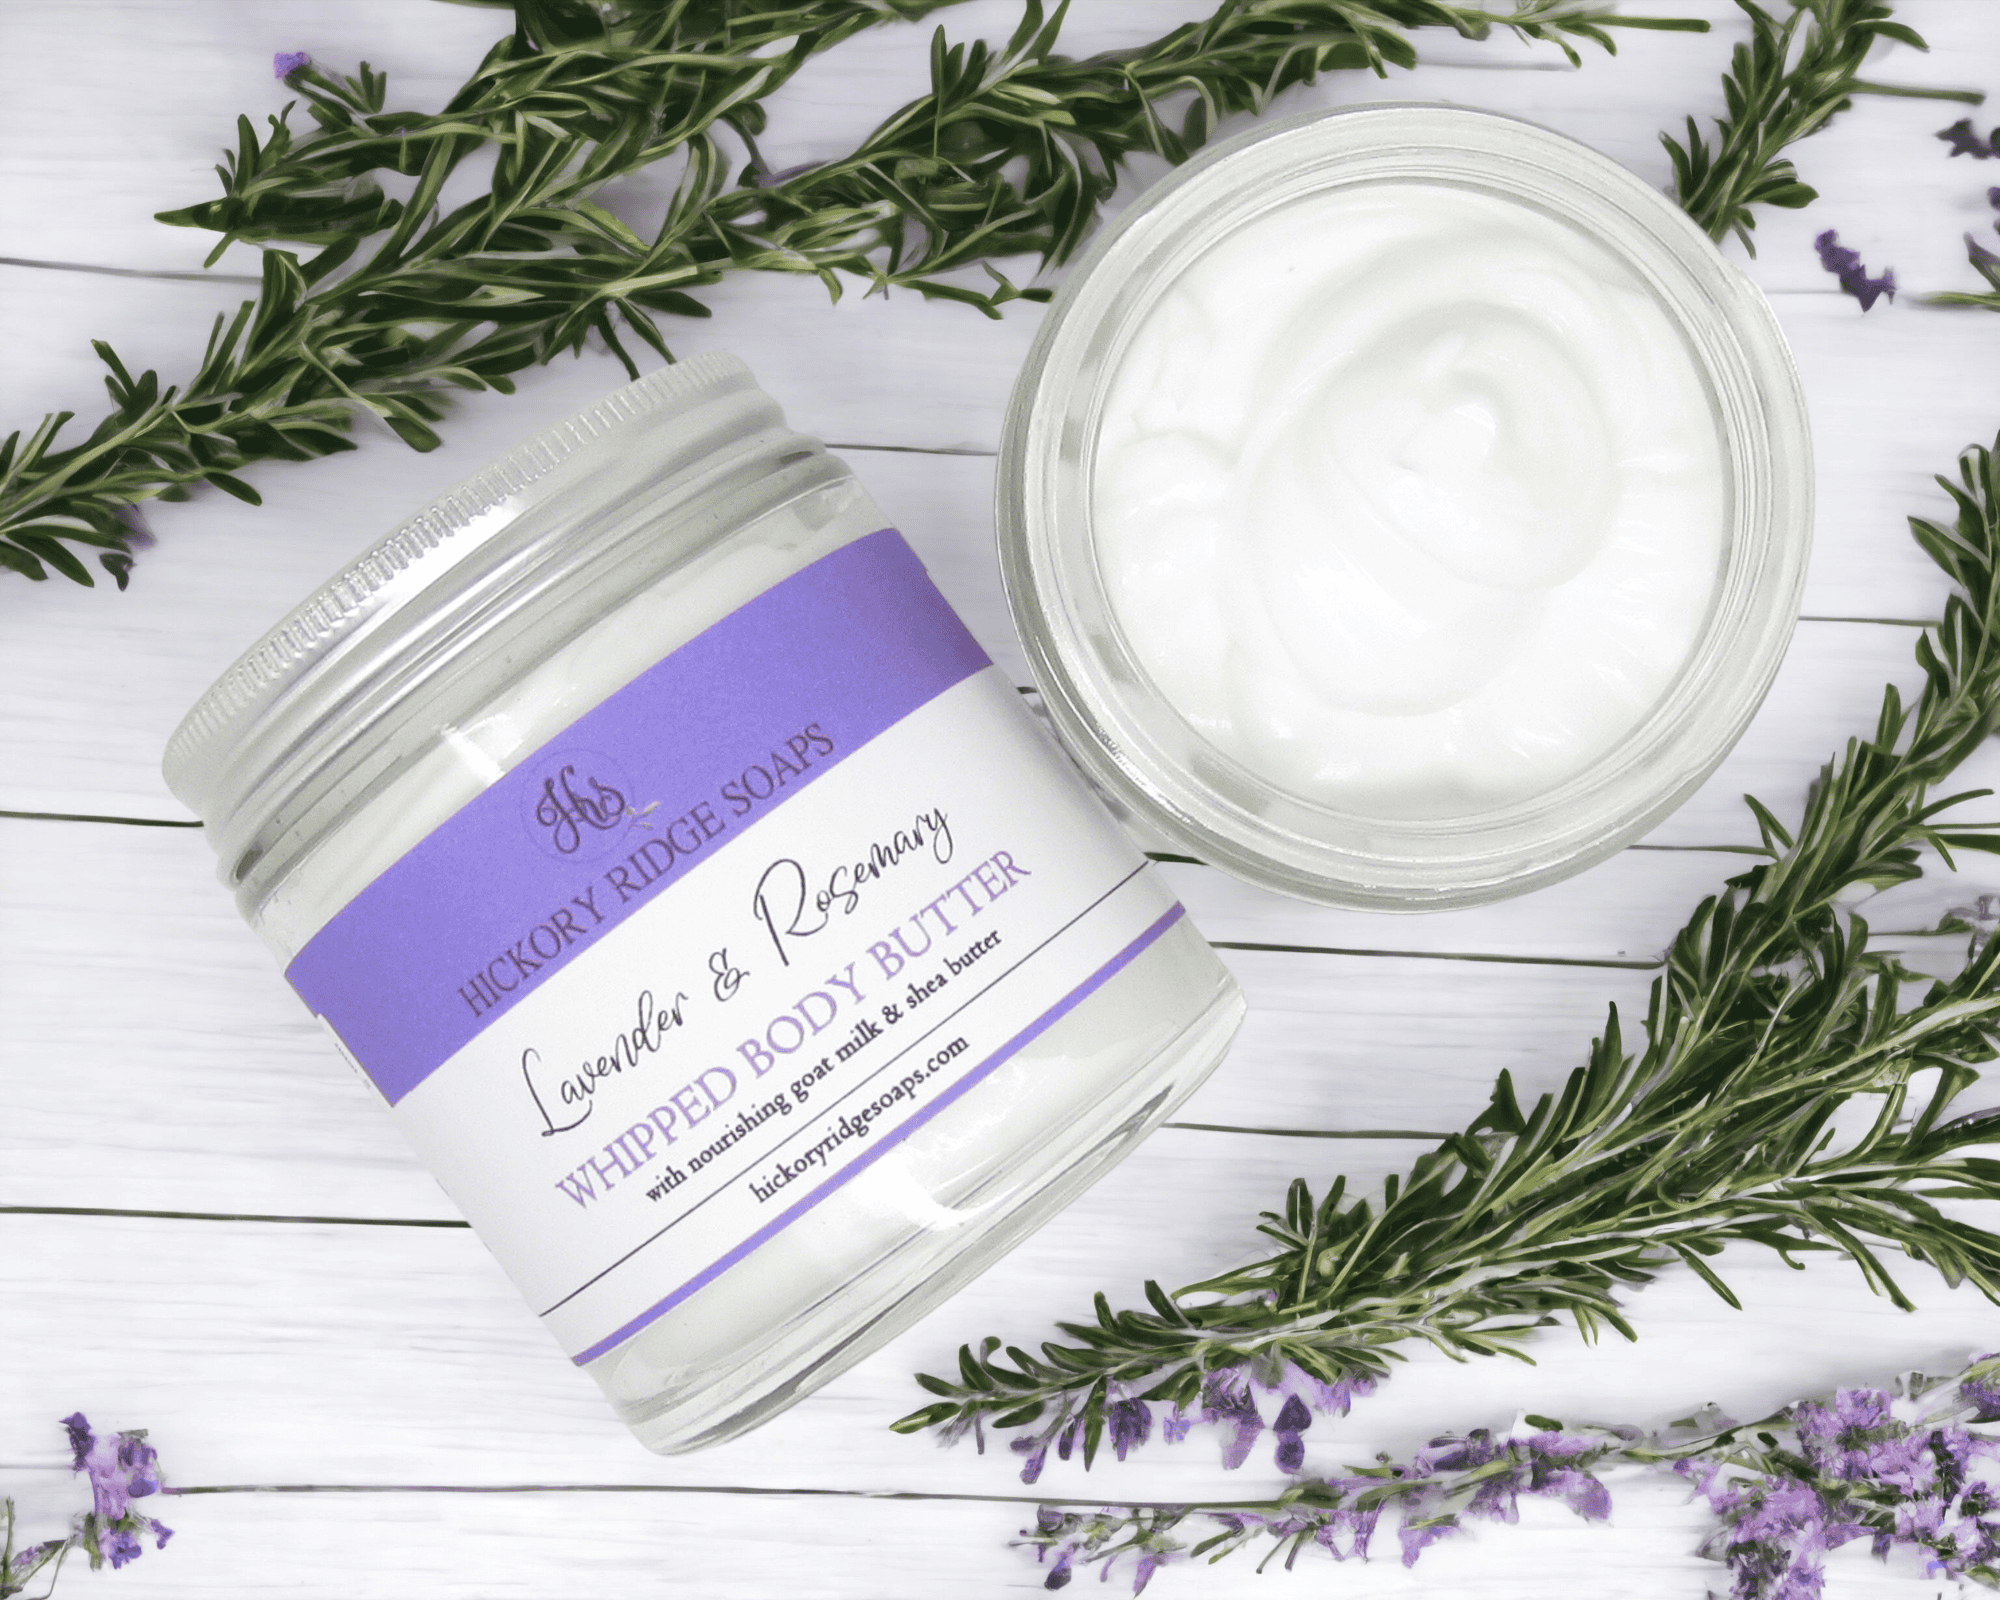 Rosemary and Lavender Whipped Body Butter – Legend's Creek Farm